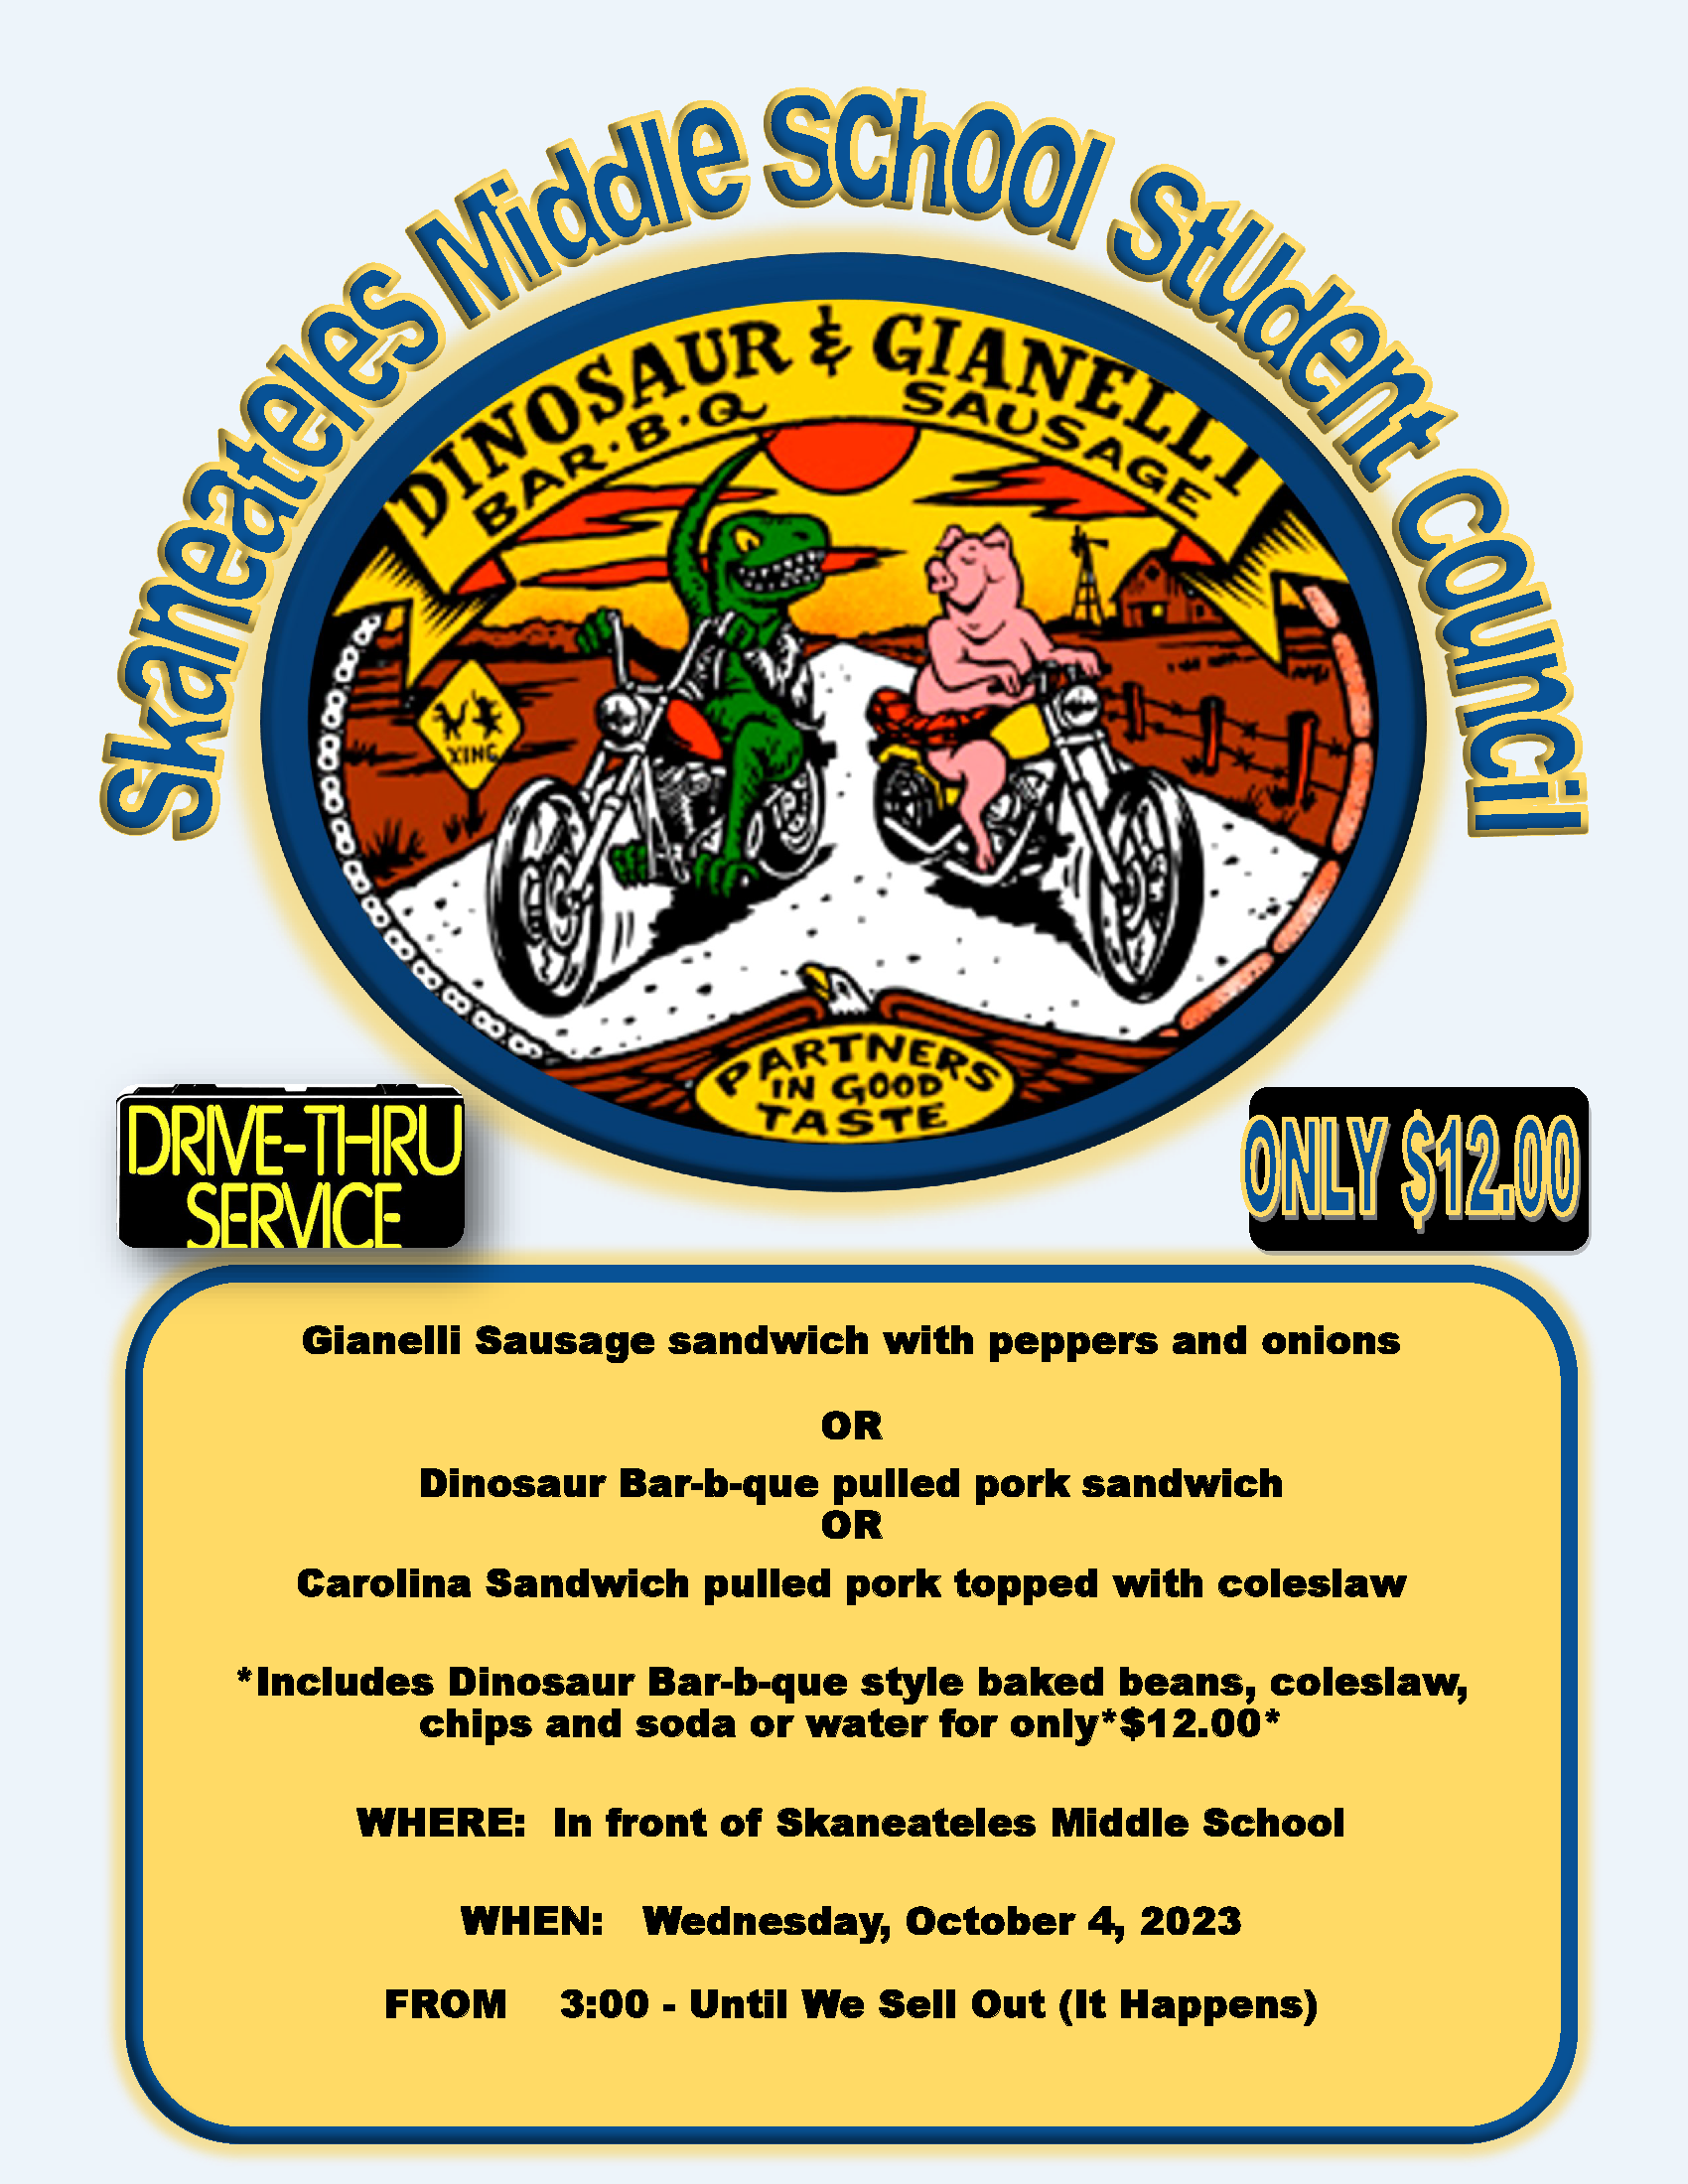 The Skaneateles Middle School Student Council will be holding a Dinosaur Bar-b-que and Gianelli Sausage fundraiser in front of the middle school Wednesday, Oct. 4. The fundraiser begins at 3 p.m. and runs until the food is sold out. The drive-thru service costs $12 and comes with a variety of choices, including a Gianelli Sausage sandwich with peppers and onions, Dinosaur Bar-b-que pulled pork sandwich, or Carolina Sandwich pulled port topped with coleslaw. Each meal includes baked beans, coleslaw, and chips, as well as a soda or water.